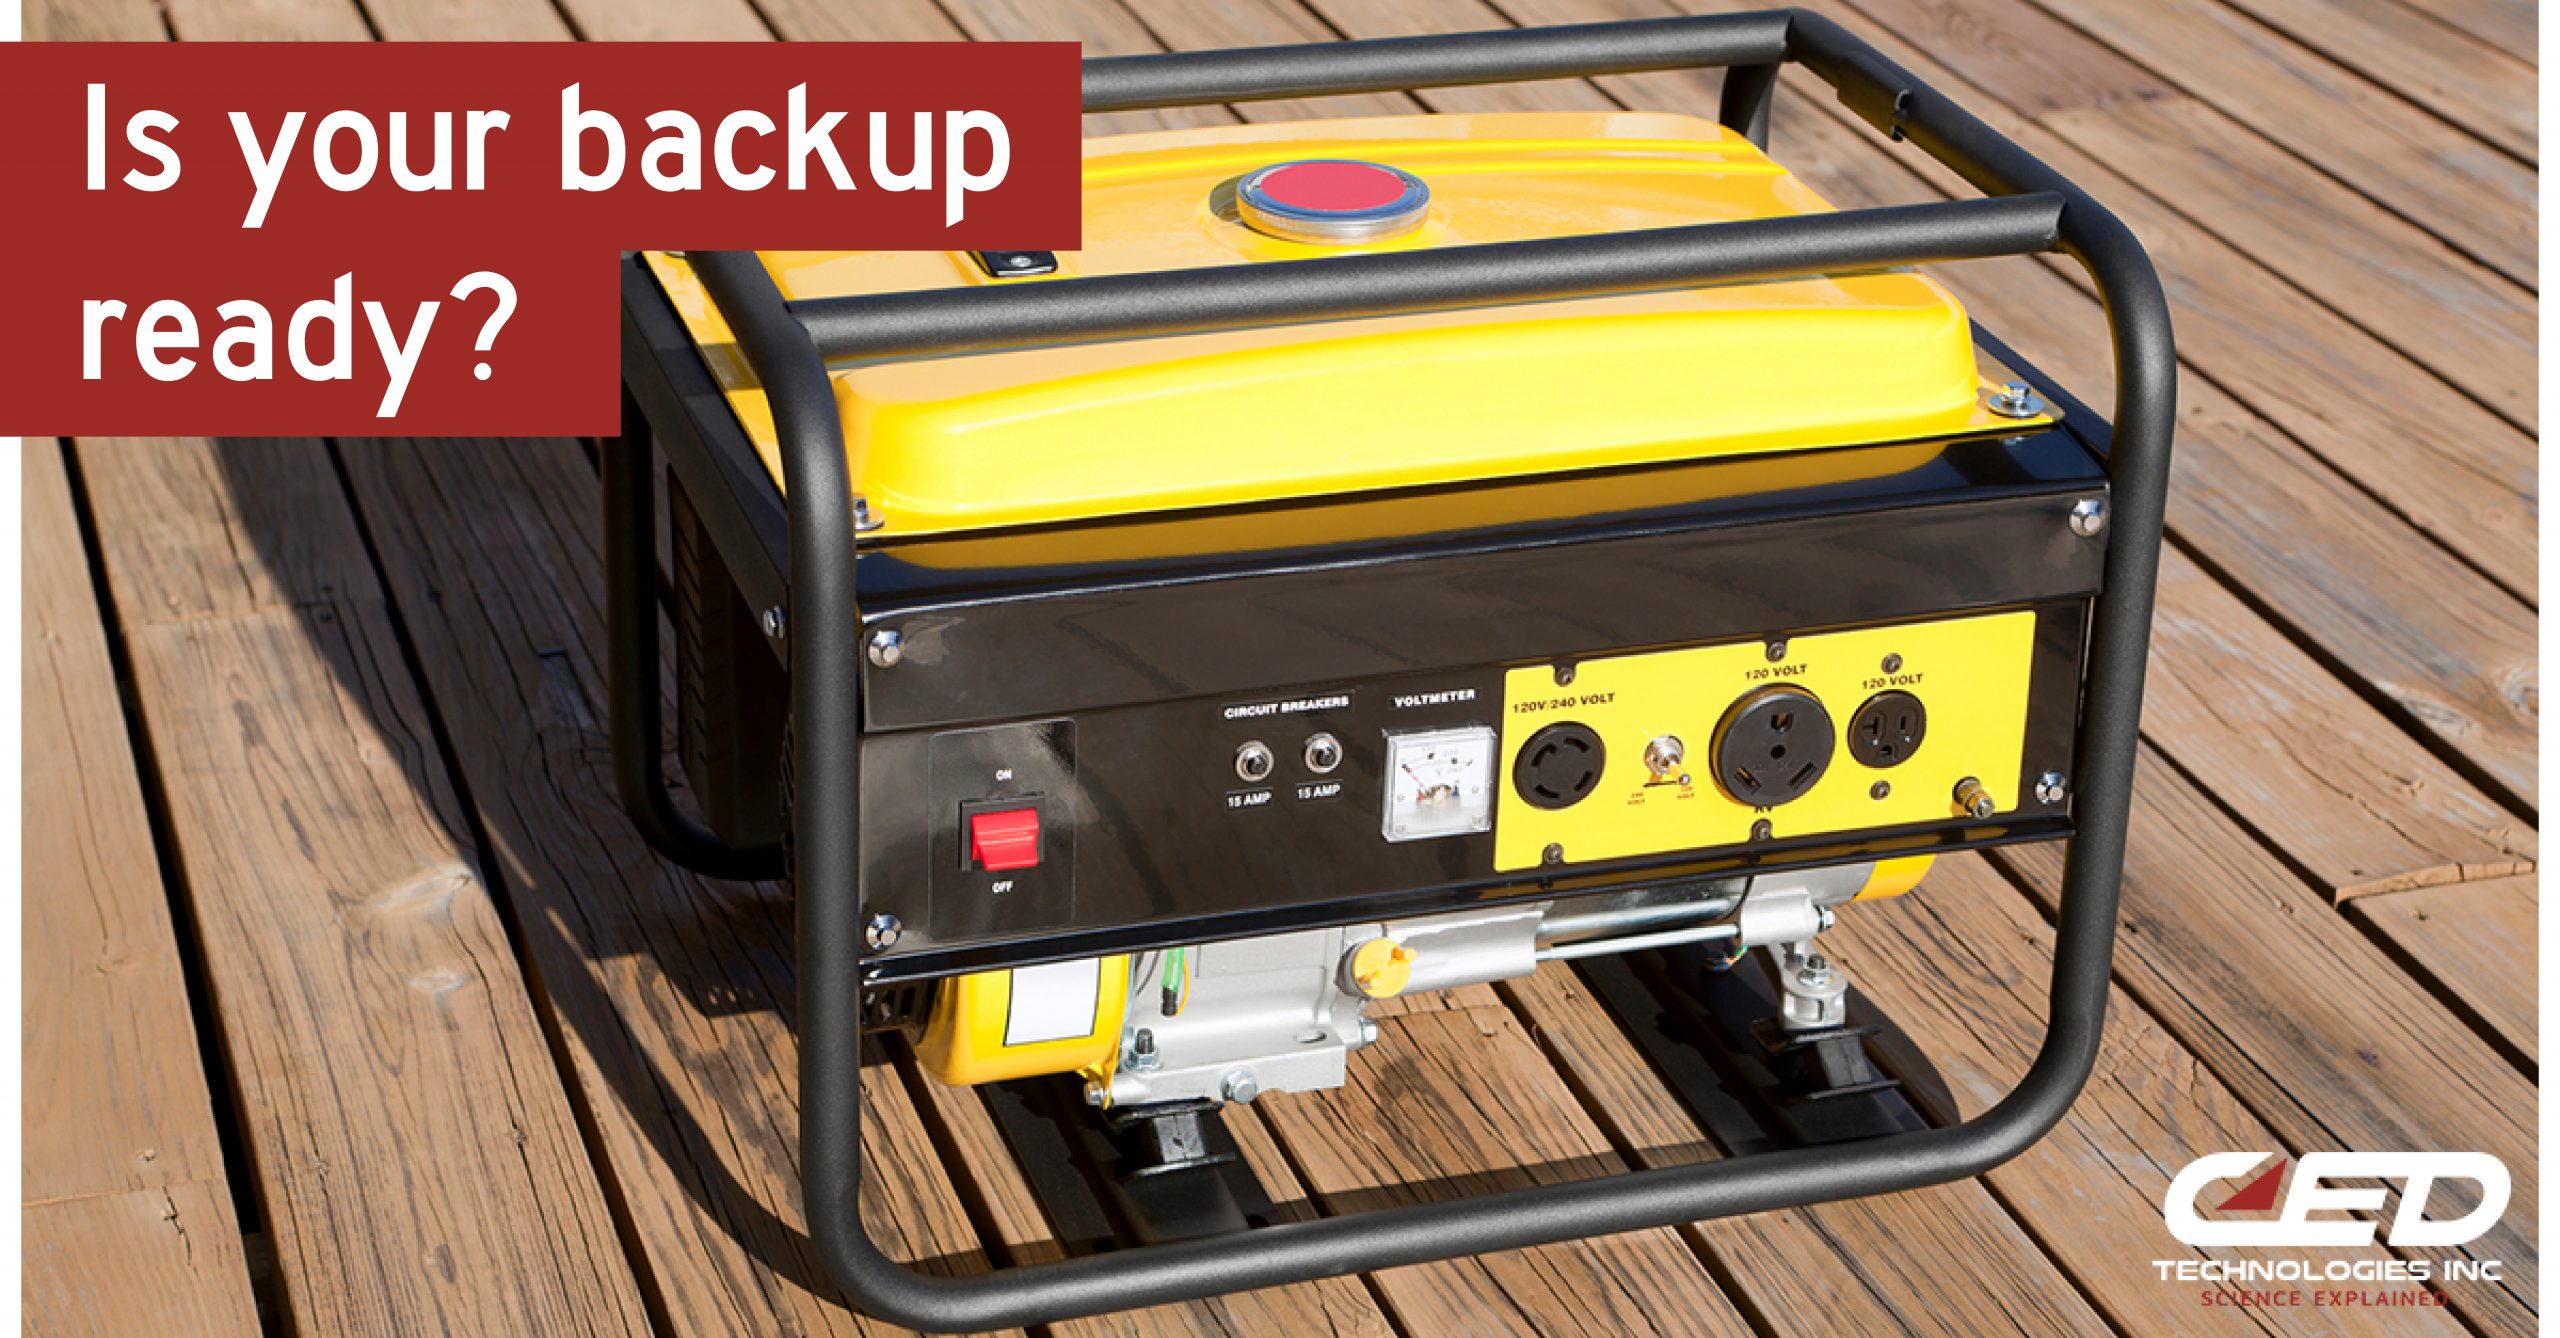 Generator Safety: Get Your Back-Up Ready